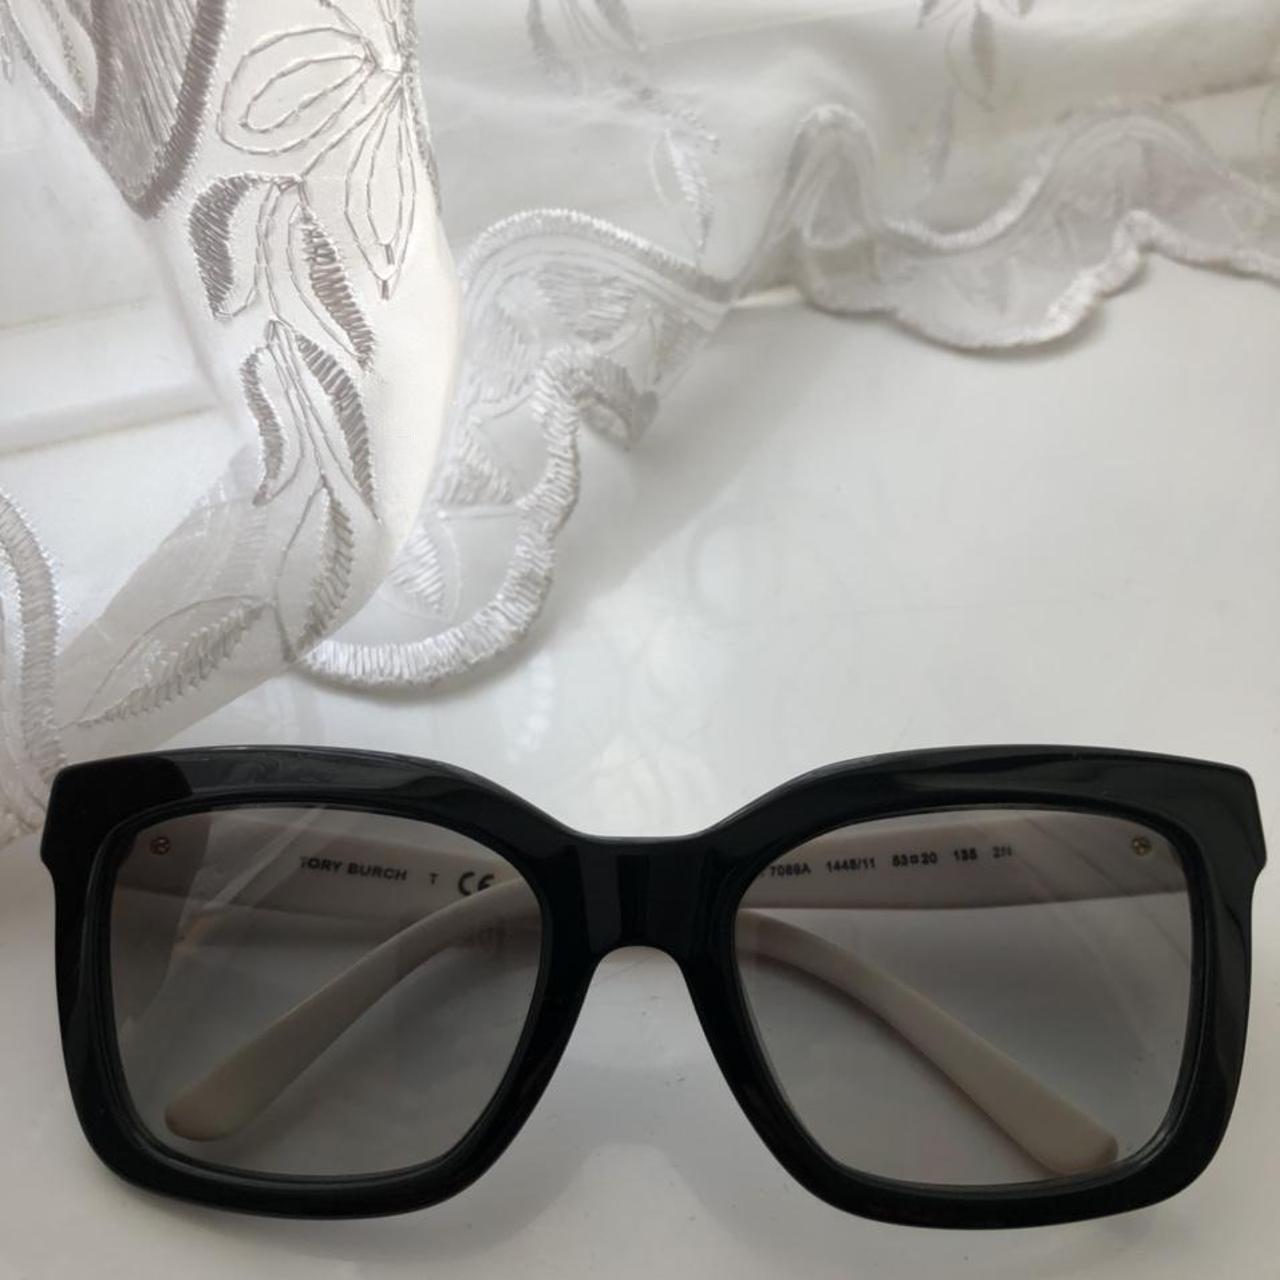 Product Image 1 - Tory Burch sunglasses in black